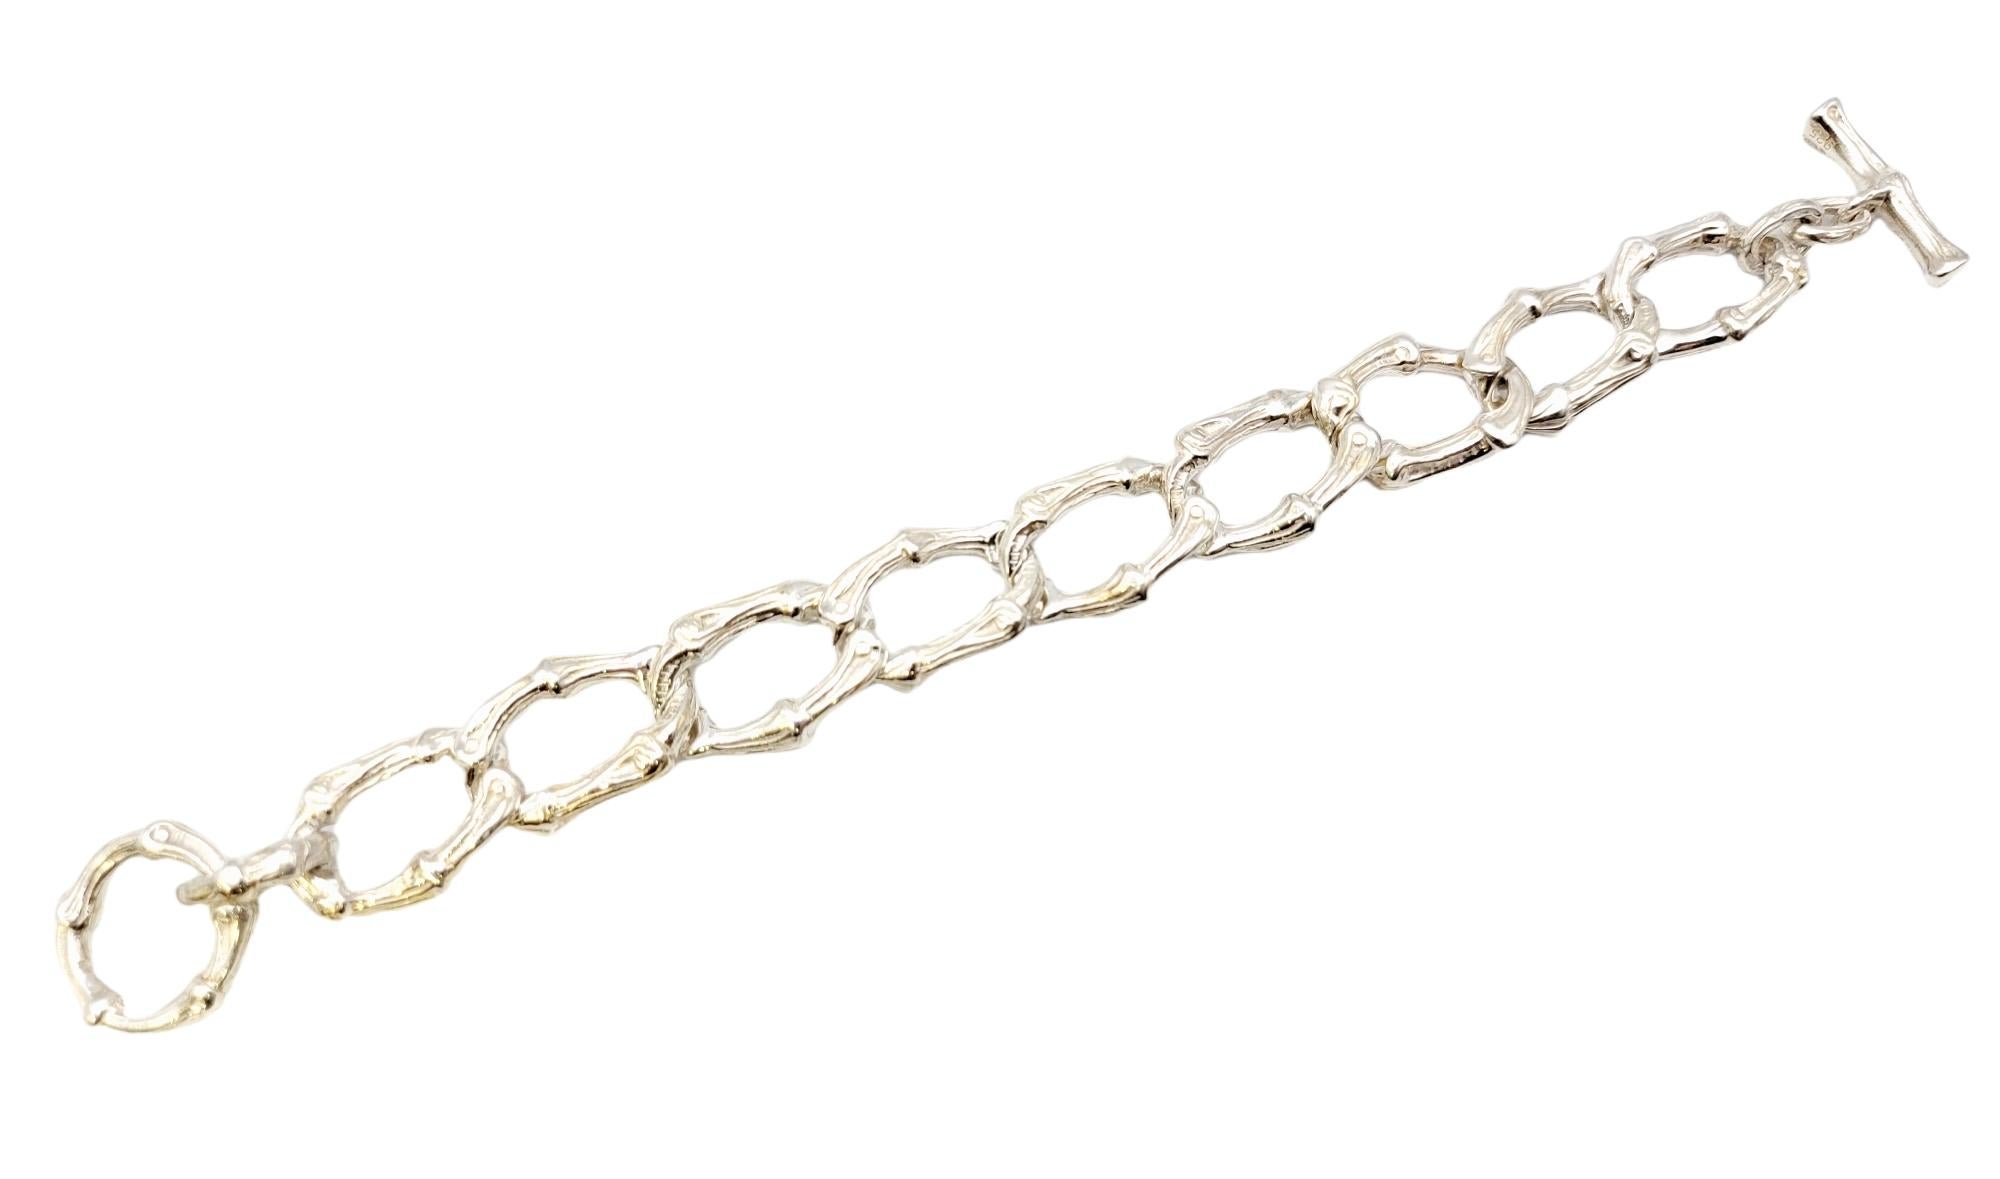 Beautiful vintage Tiffany & Co. bracelet circa 1996 made of fine polished sterling silver. The interlocking wide oval links have a unique bamboo design with toggle closure. 

Metal: Sterling Silver
Weight: 364.4 grams
Bracelet Length: 8.5